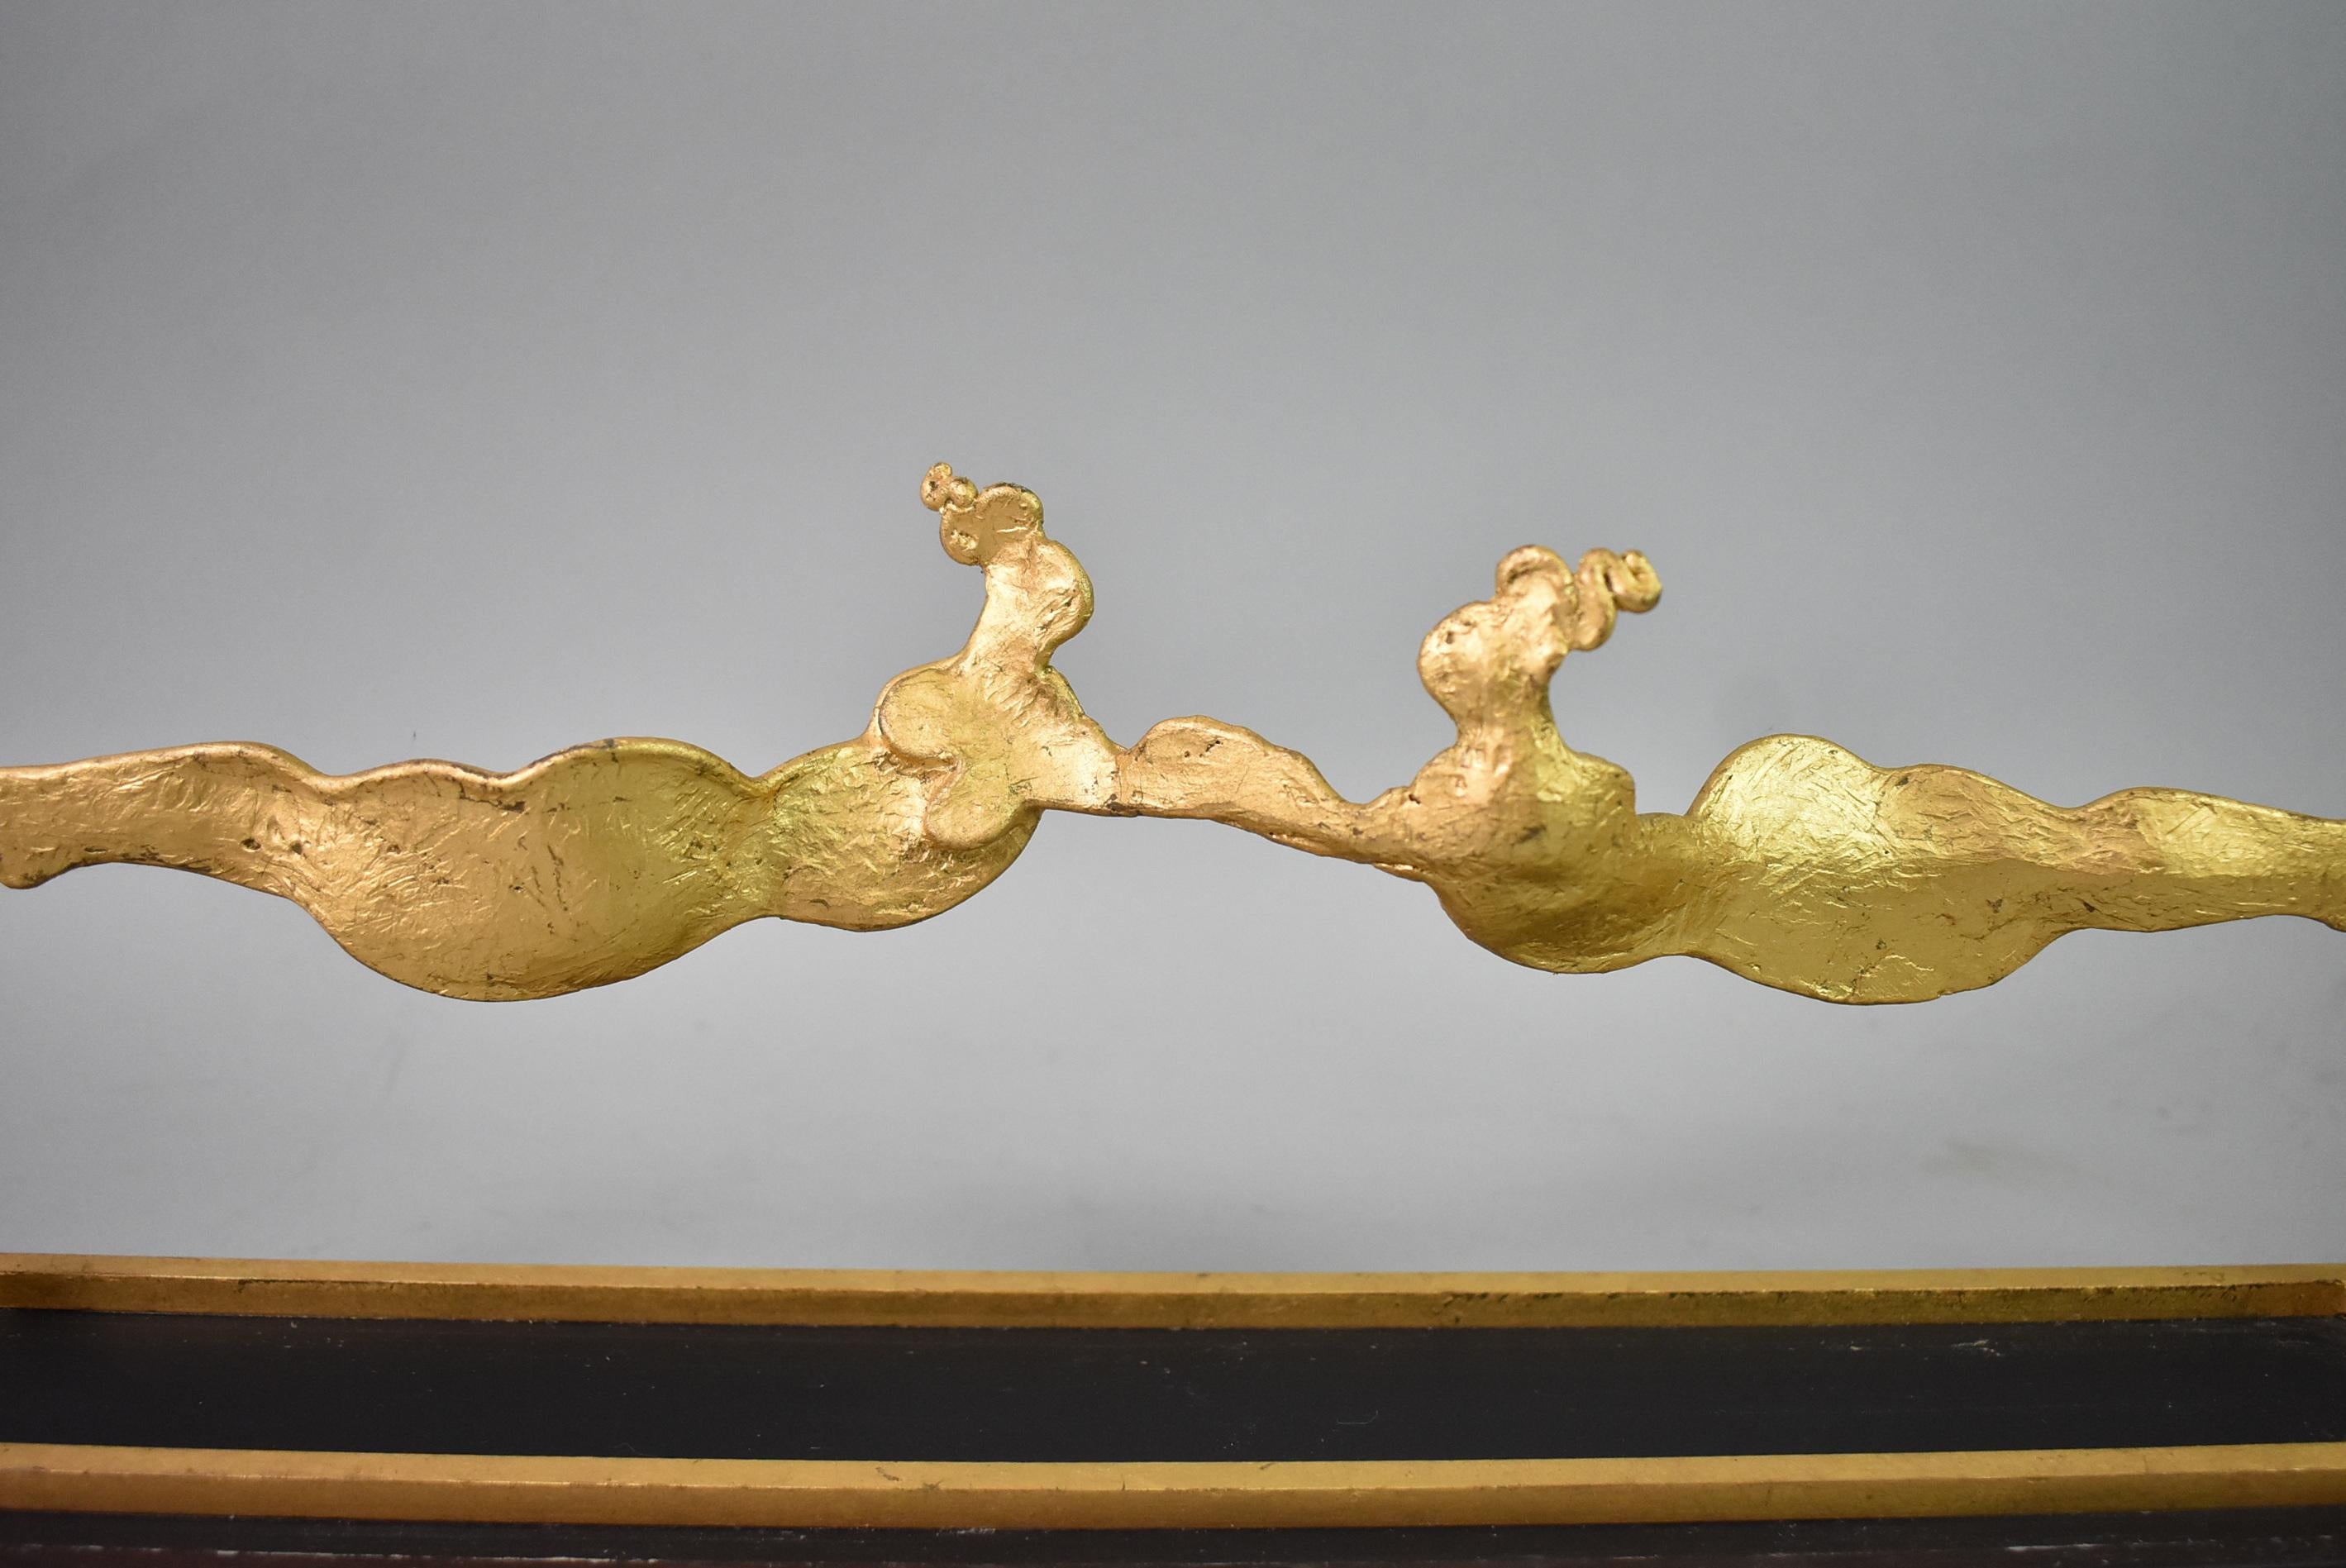 Signed nice patina. Gold leaf over cast bronze. Carole Harrison (10/30/33 - 4/4/22) - Born in Illinois, Carole studied at Cranbrook Academy of Arts in 1955/56, Bloomfield Hills, MI, obtaining her Masters, she was awarded a Fulbright Scholarship to